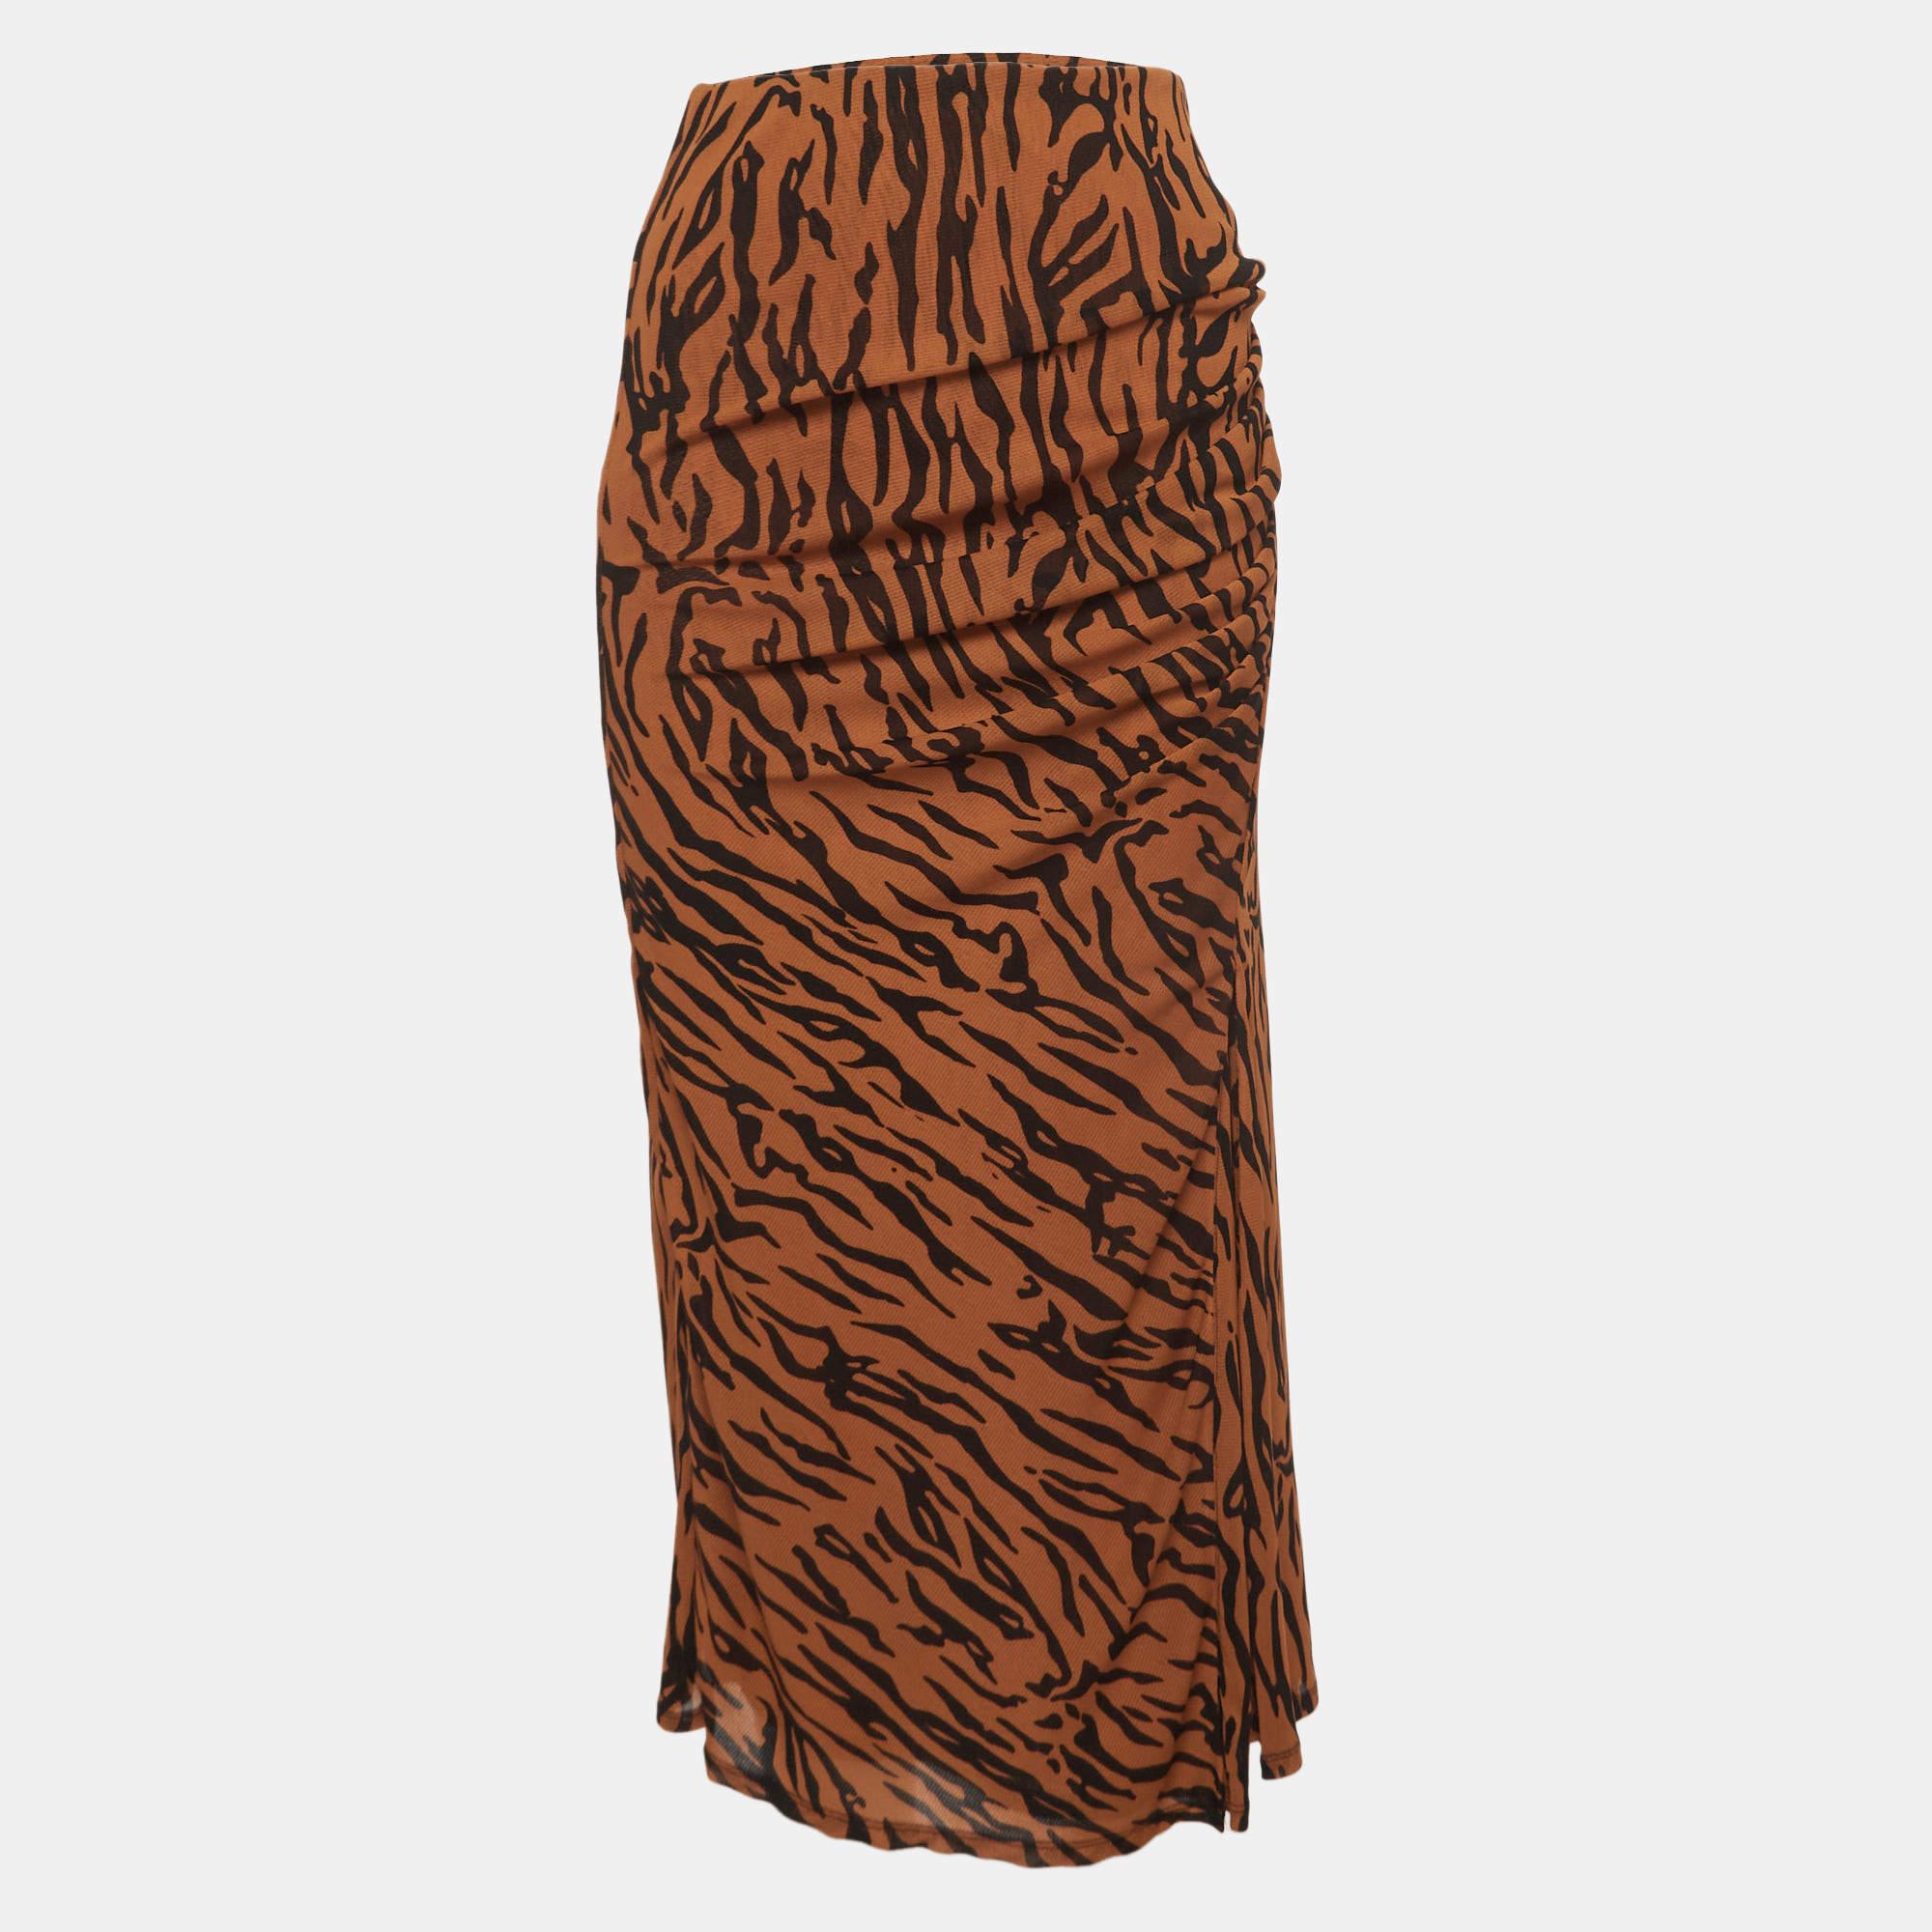 This elegant DVF skirt is worth adding to your closet! Crafted from fine materials, it is exquisitely designed into a flattering shape.

